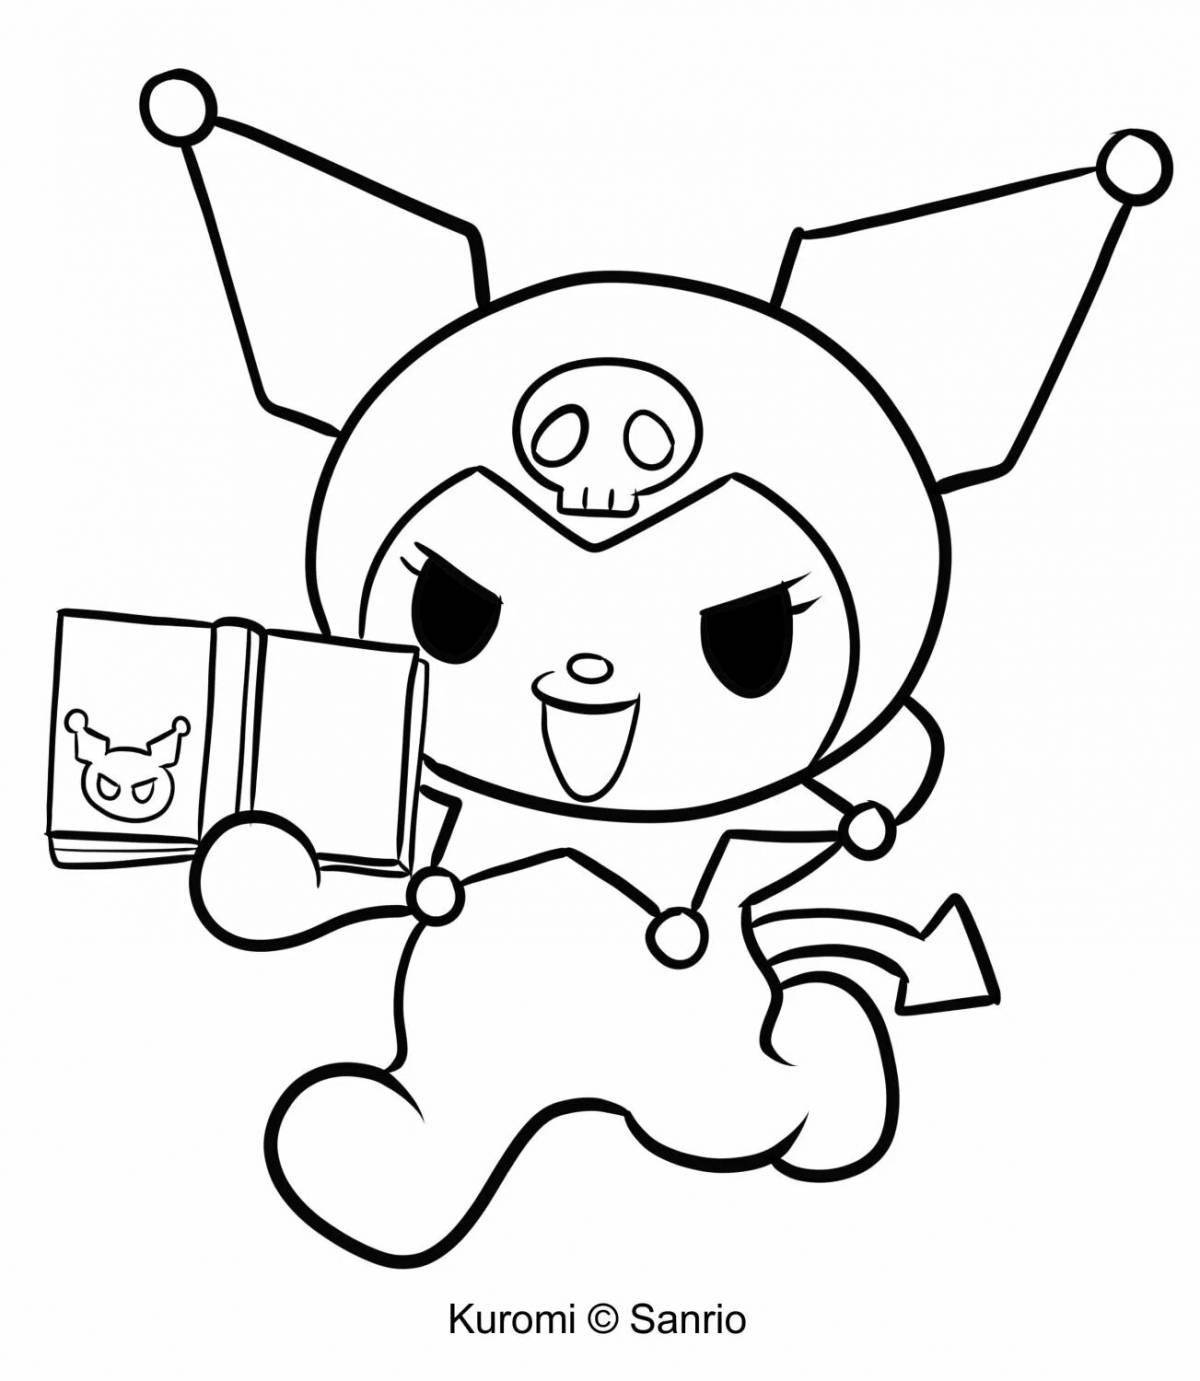 Colorful Kuromi seal coloring page